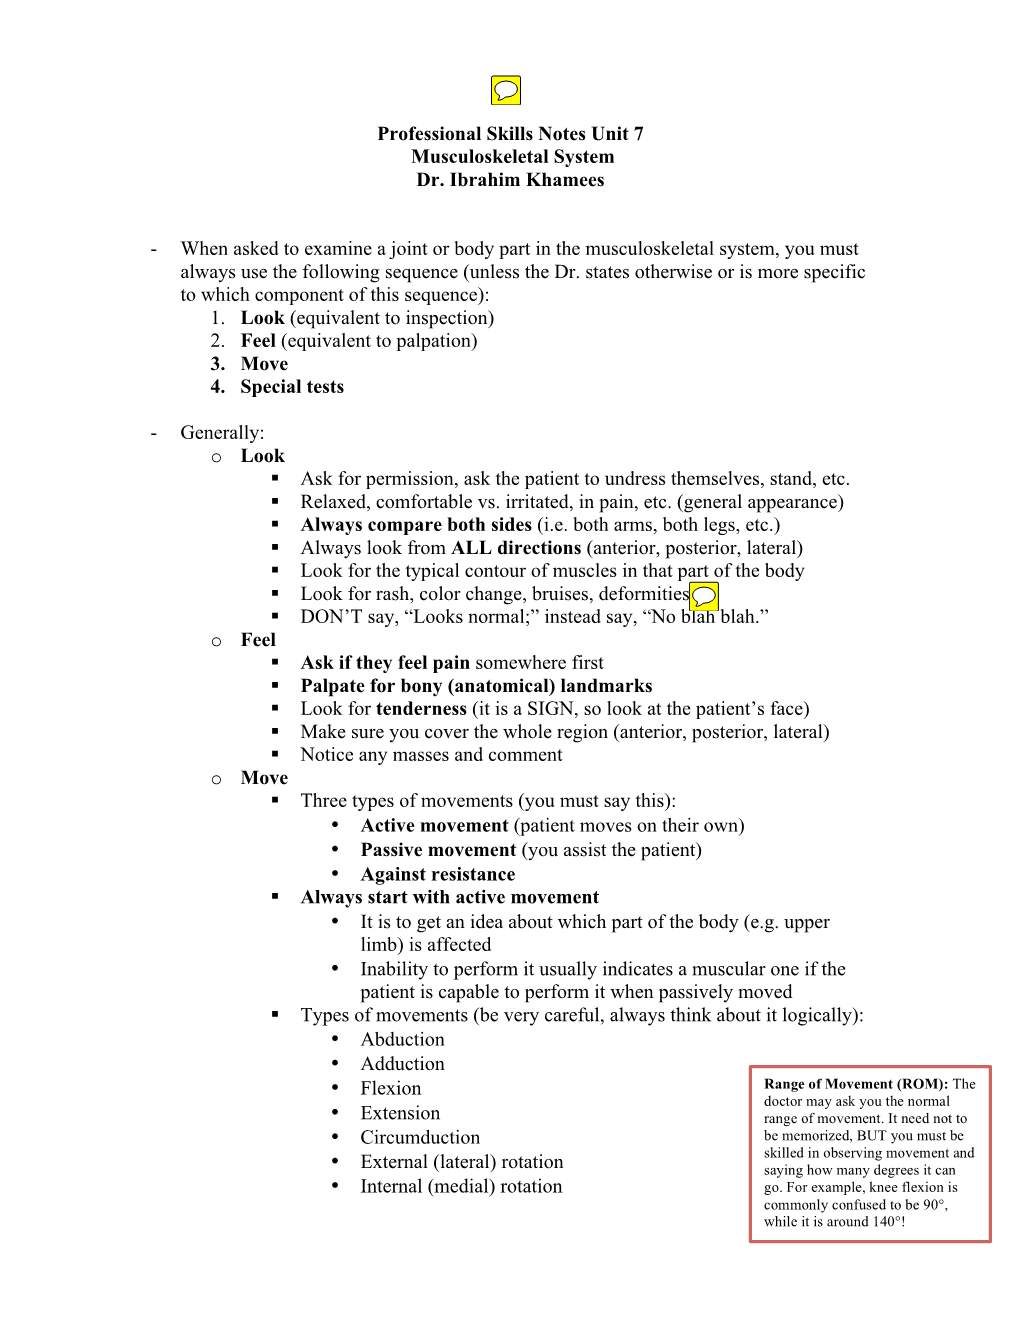 Professional Skills Notes Unit 7 Musculoskeletal System Dr